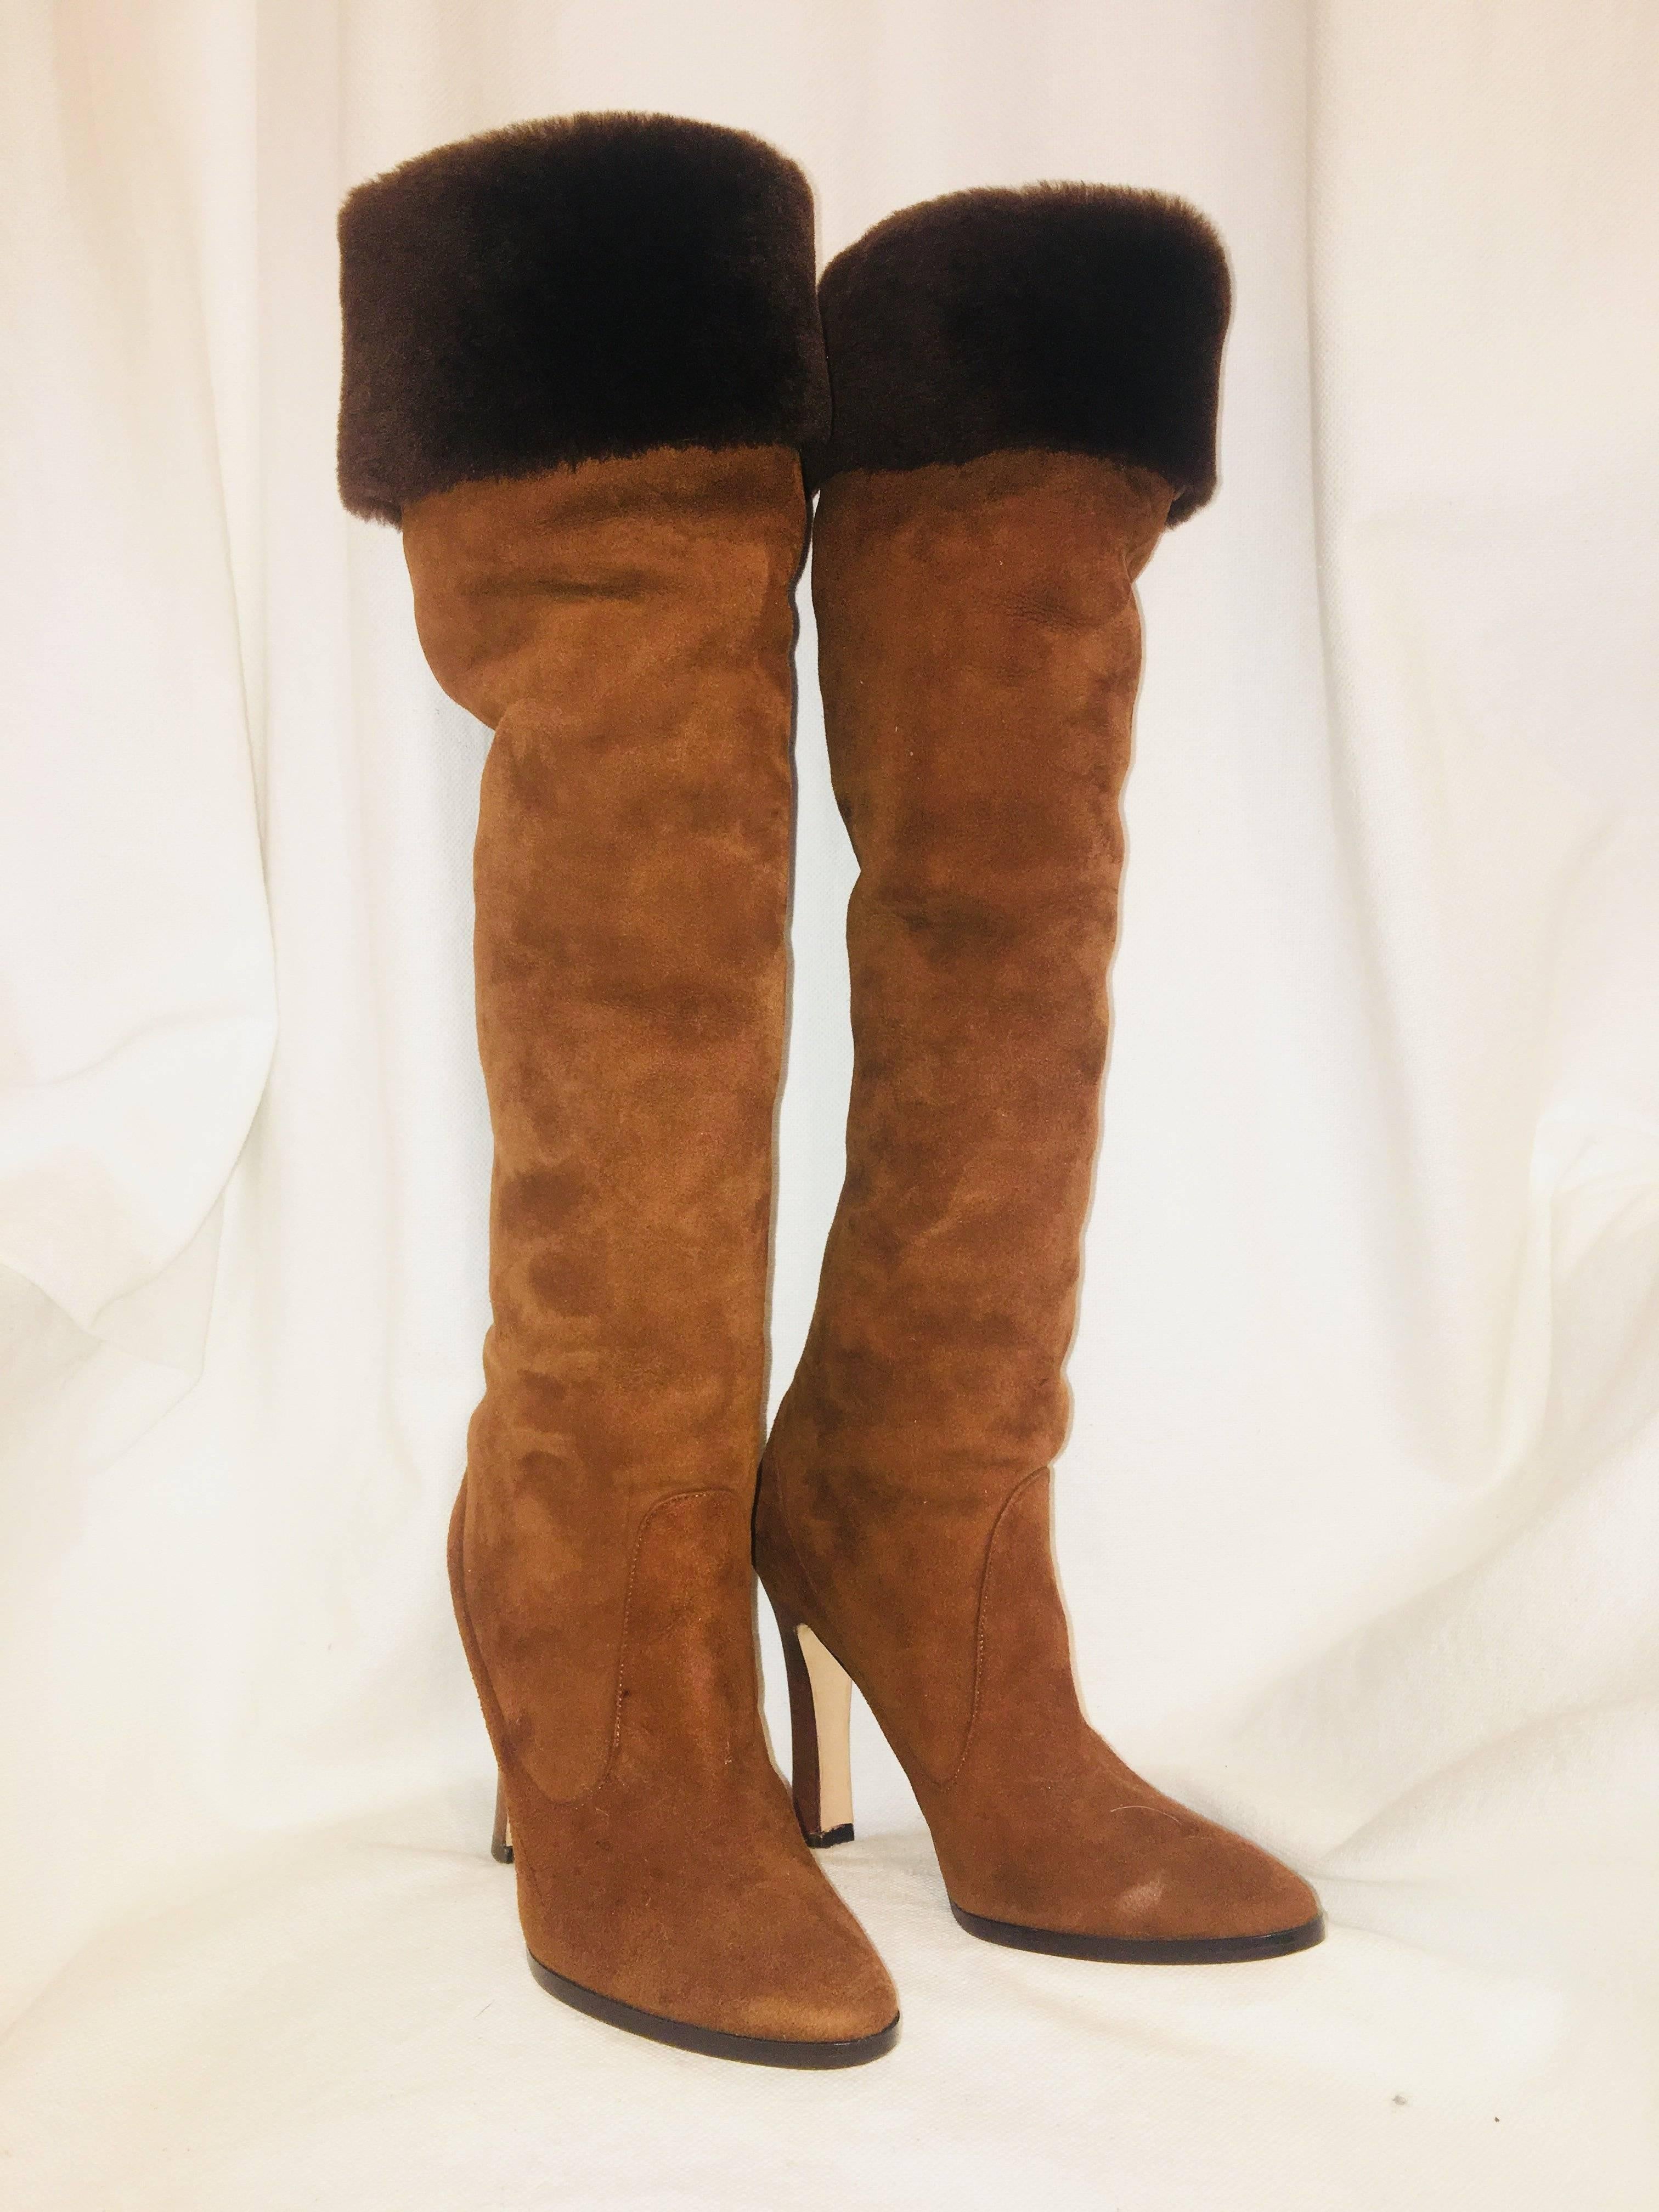 Manolo Blahnik Tall Brown Suede Boots with Fur around Top